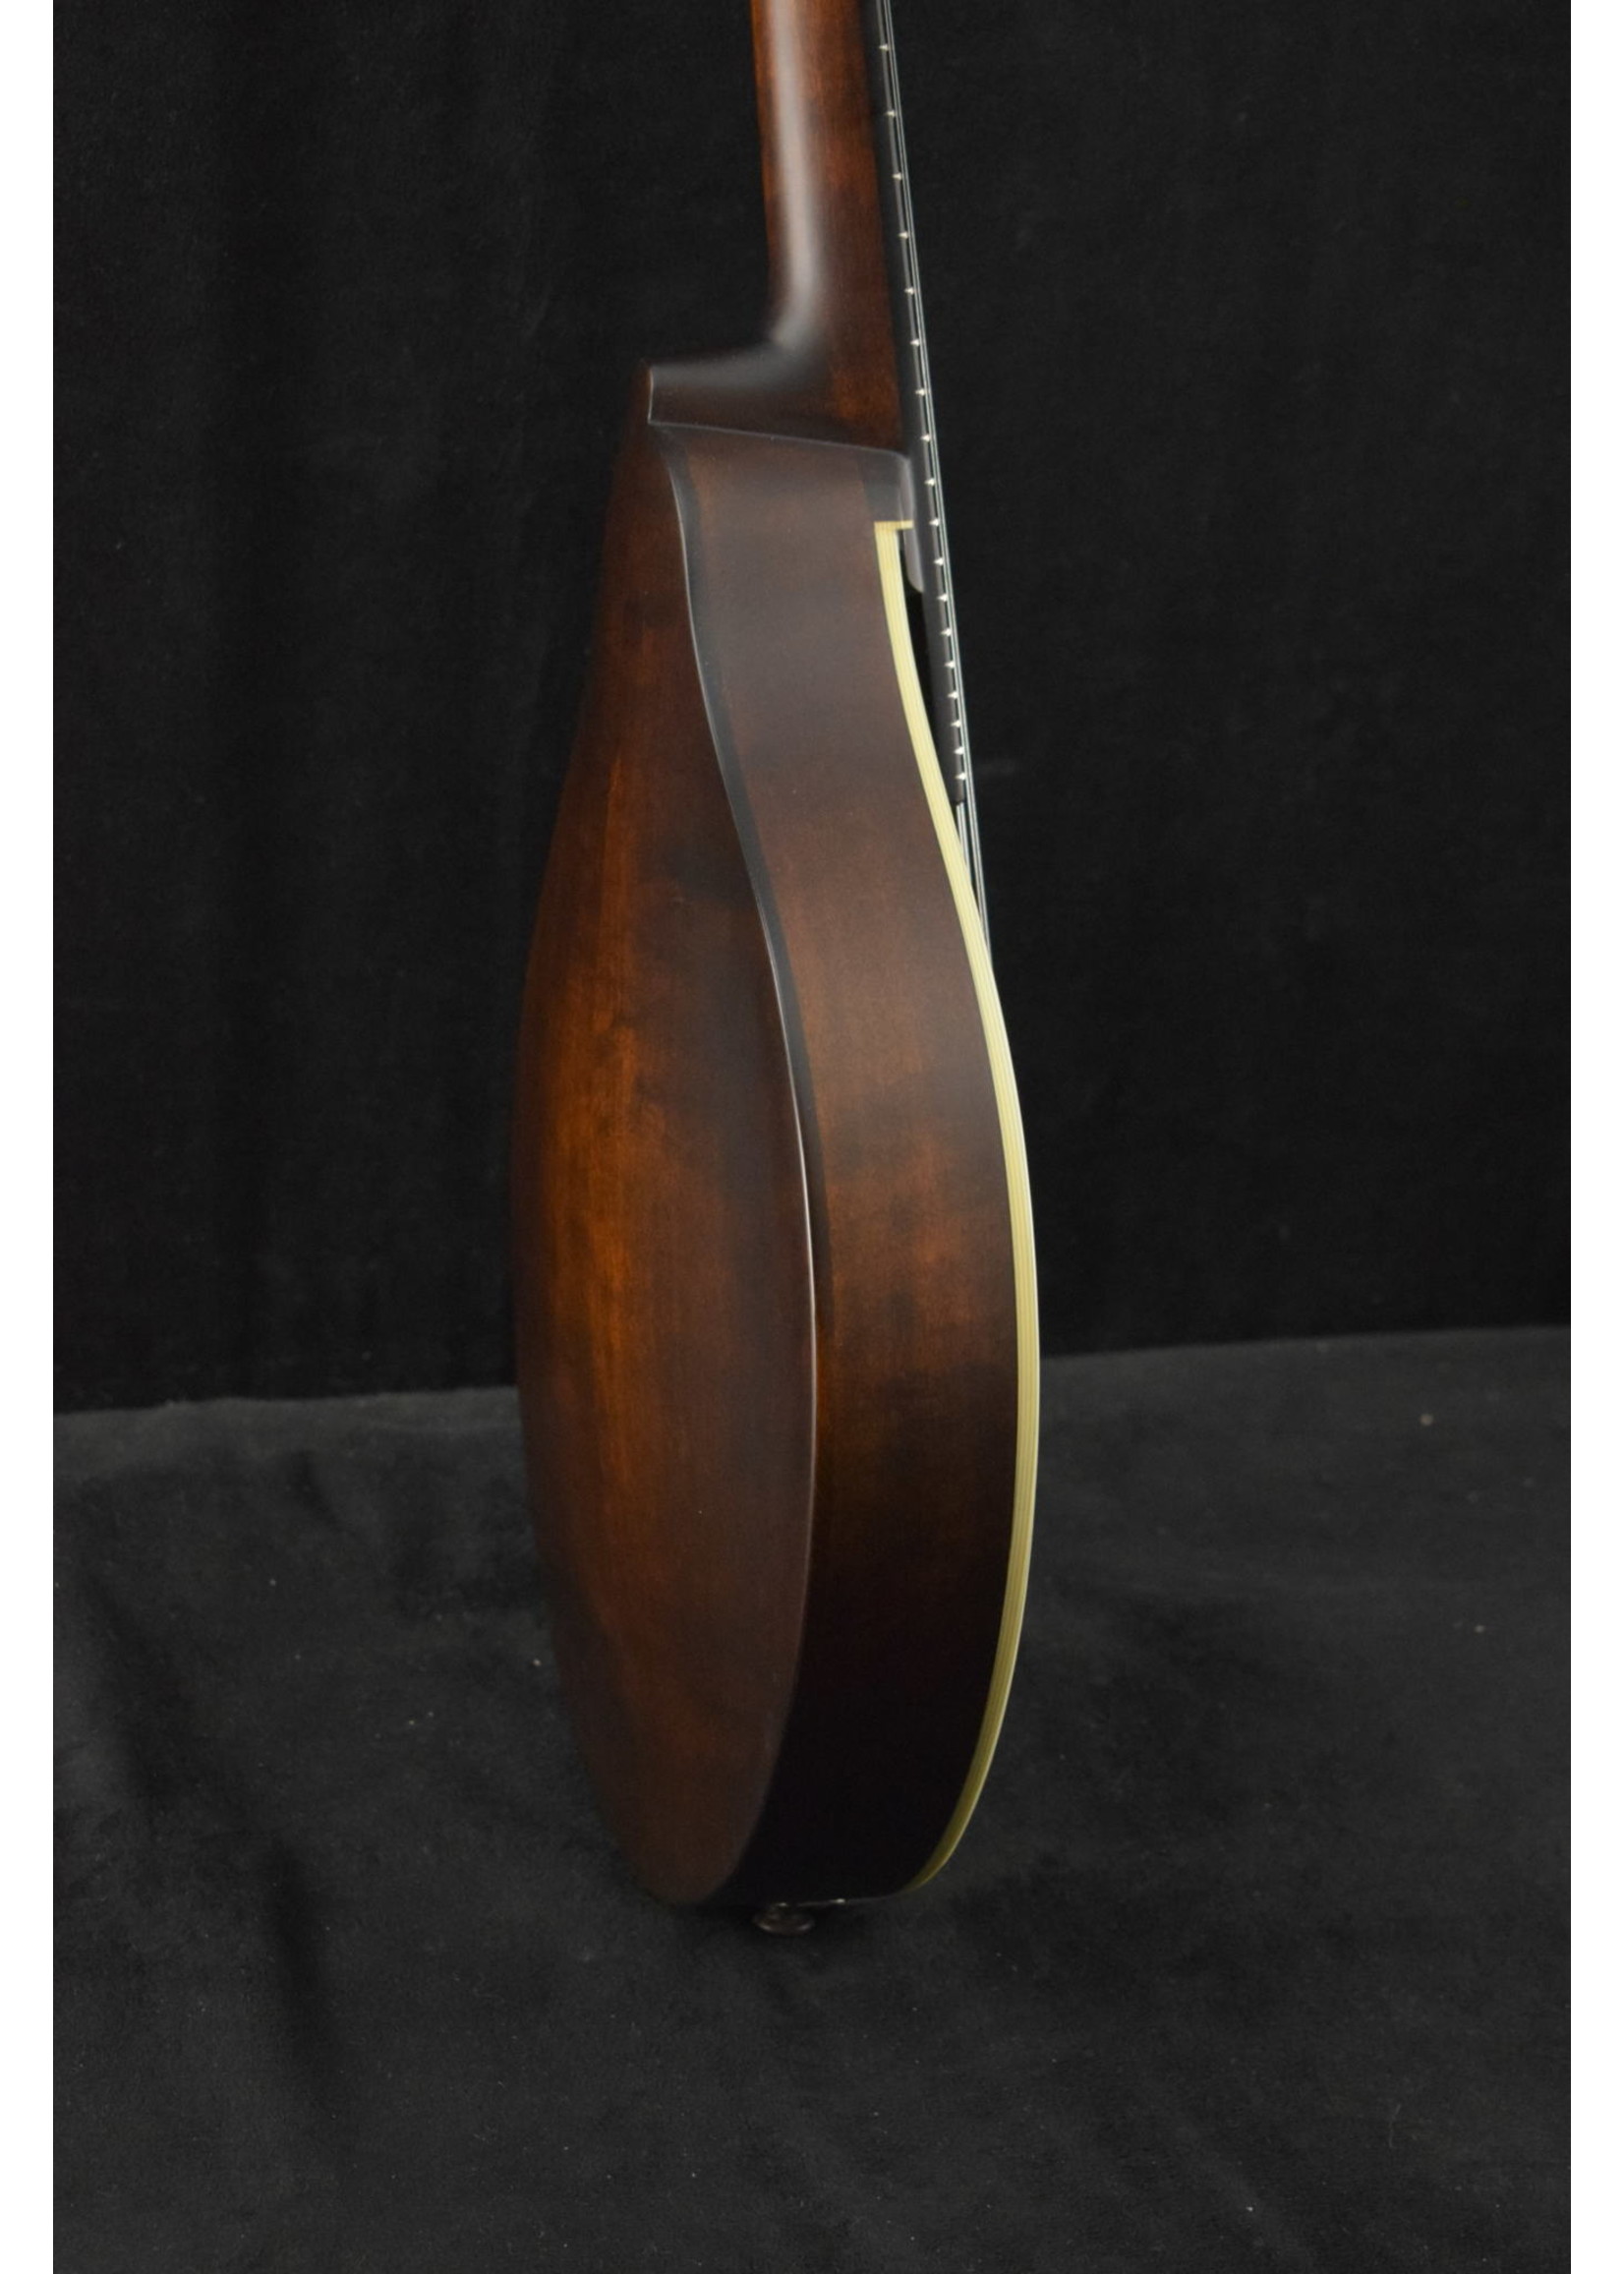 Eastman Eastman MD305L Left-Handed A-Style F-Hole Mandolin Classic Finish